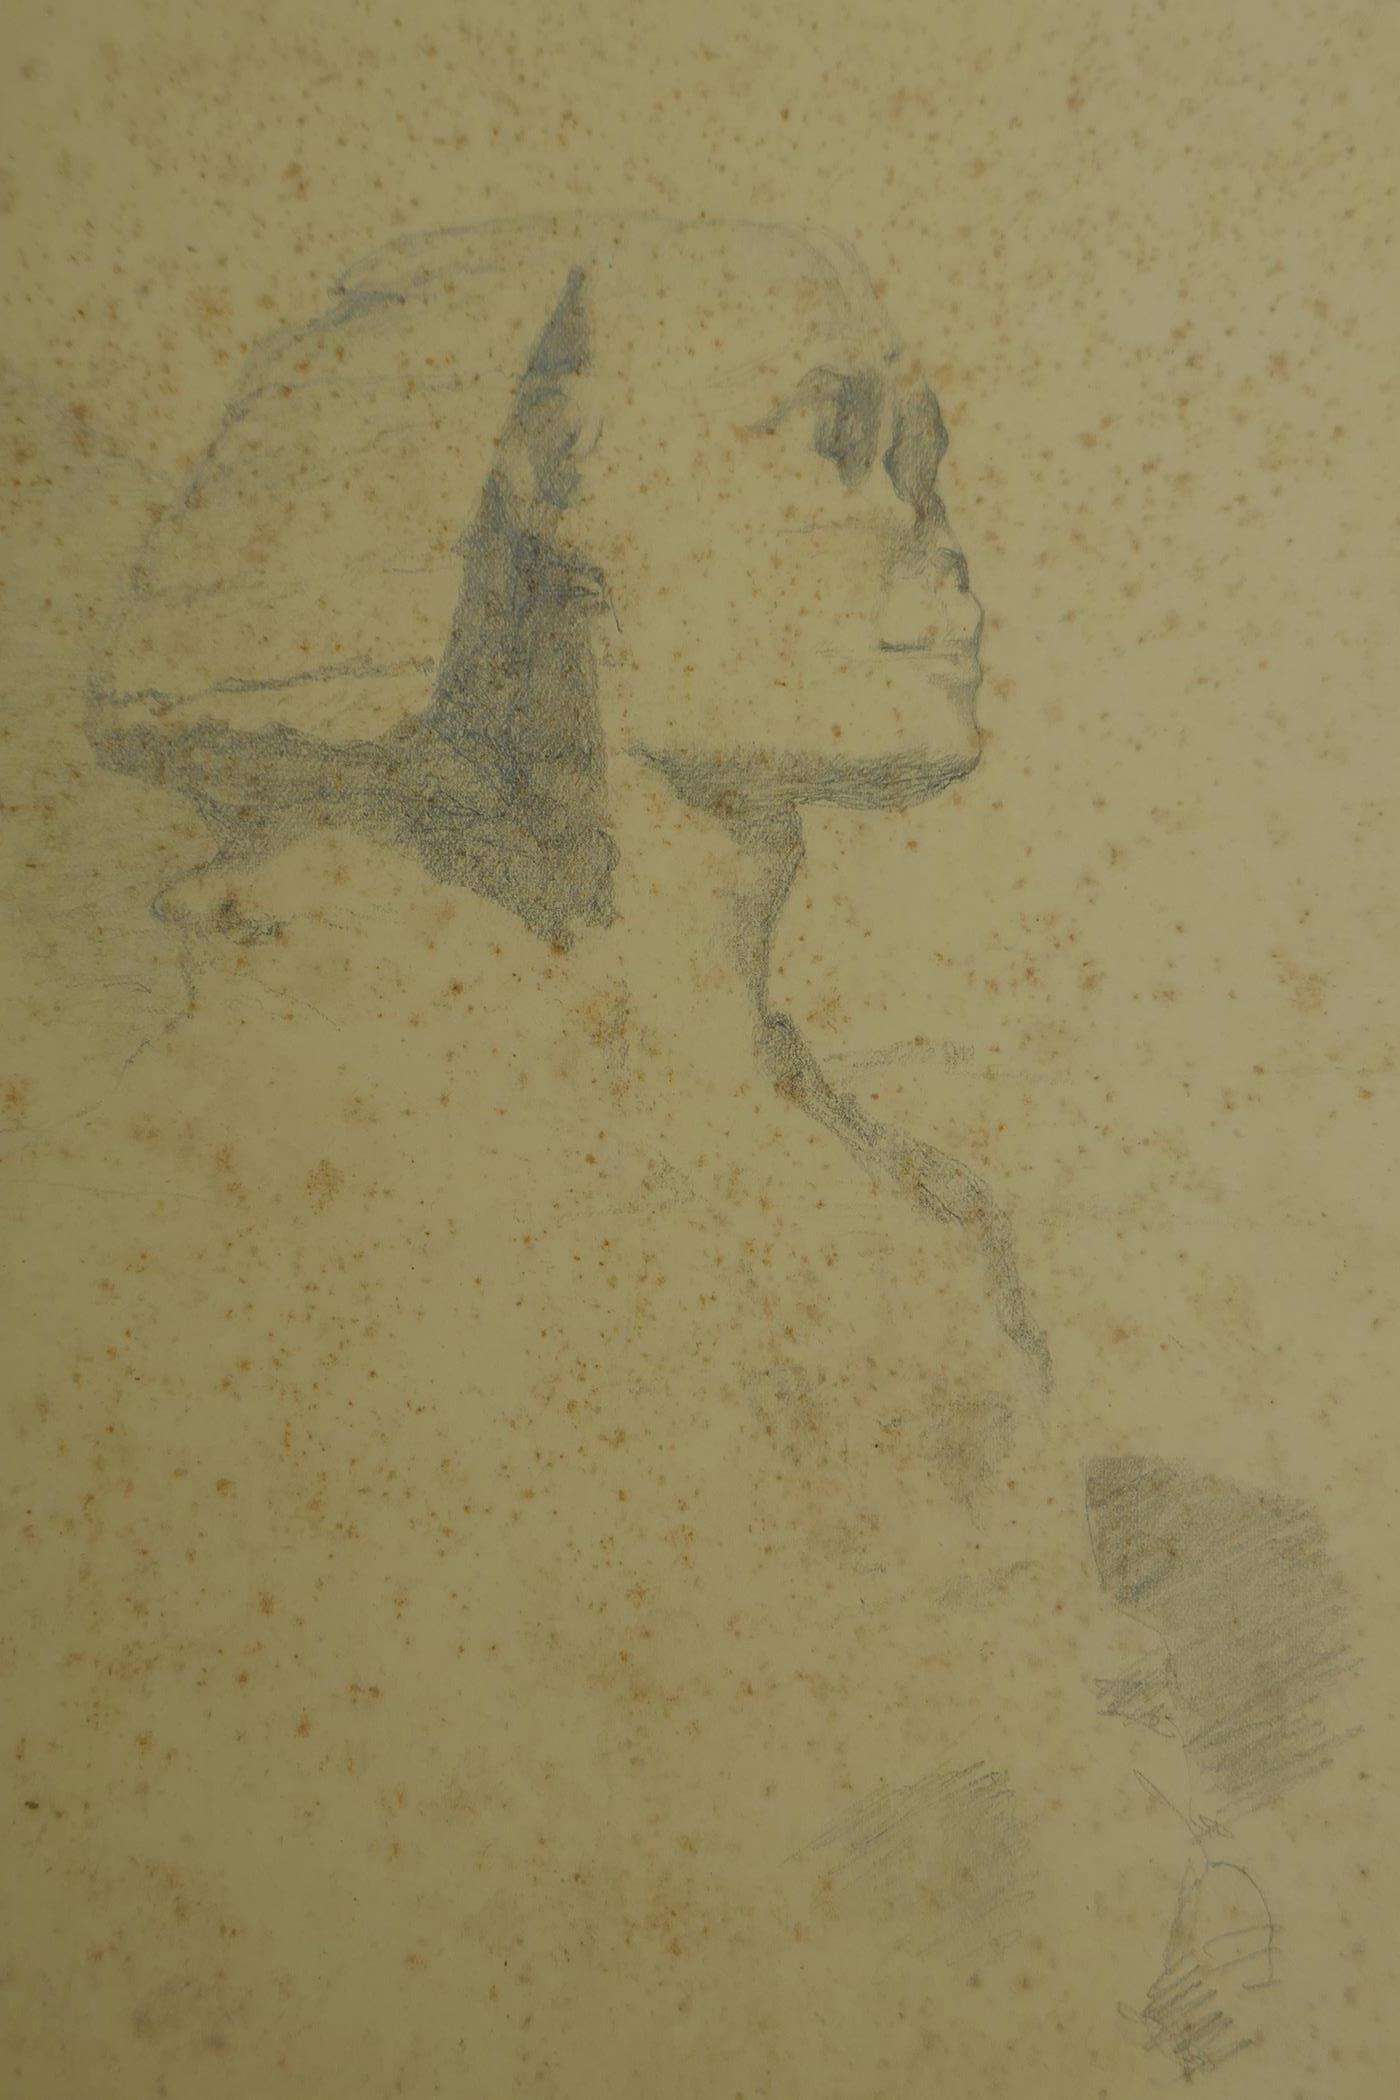 Una Hook RA, (b.1889),four early C20th pencil sketches of the Sphinx, one dated 1912, 21 x 27cm - Image 3 of 7